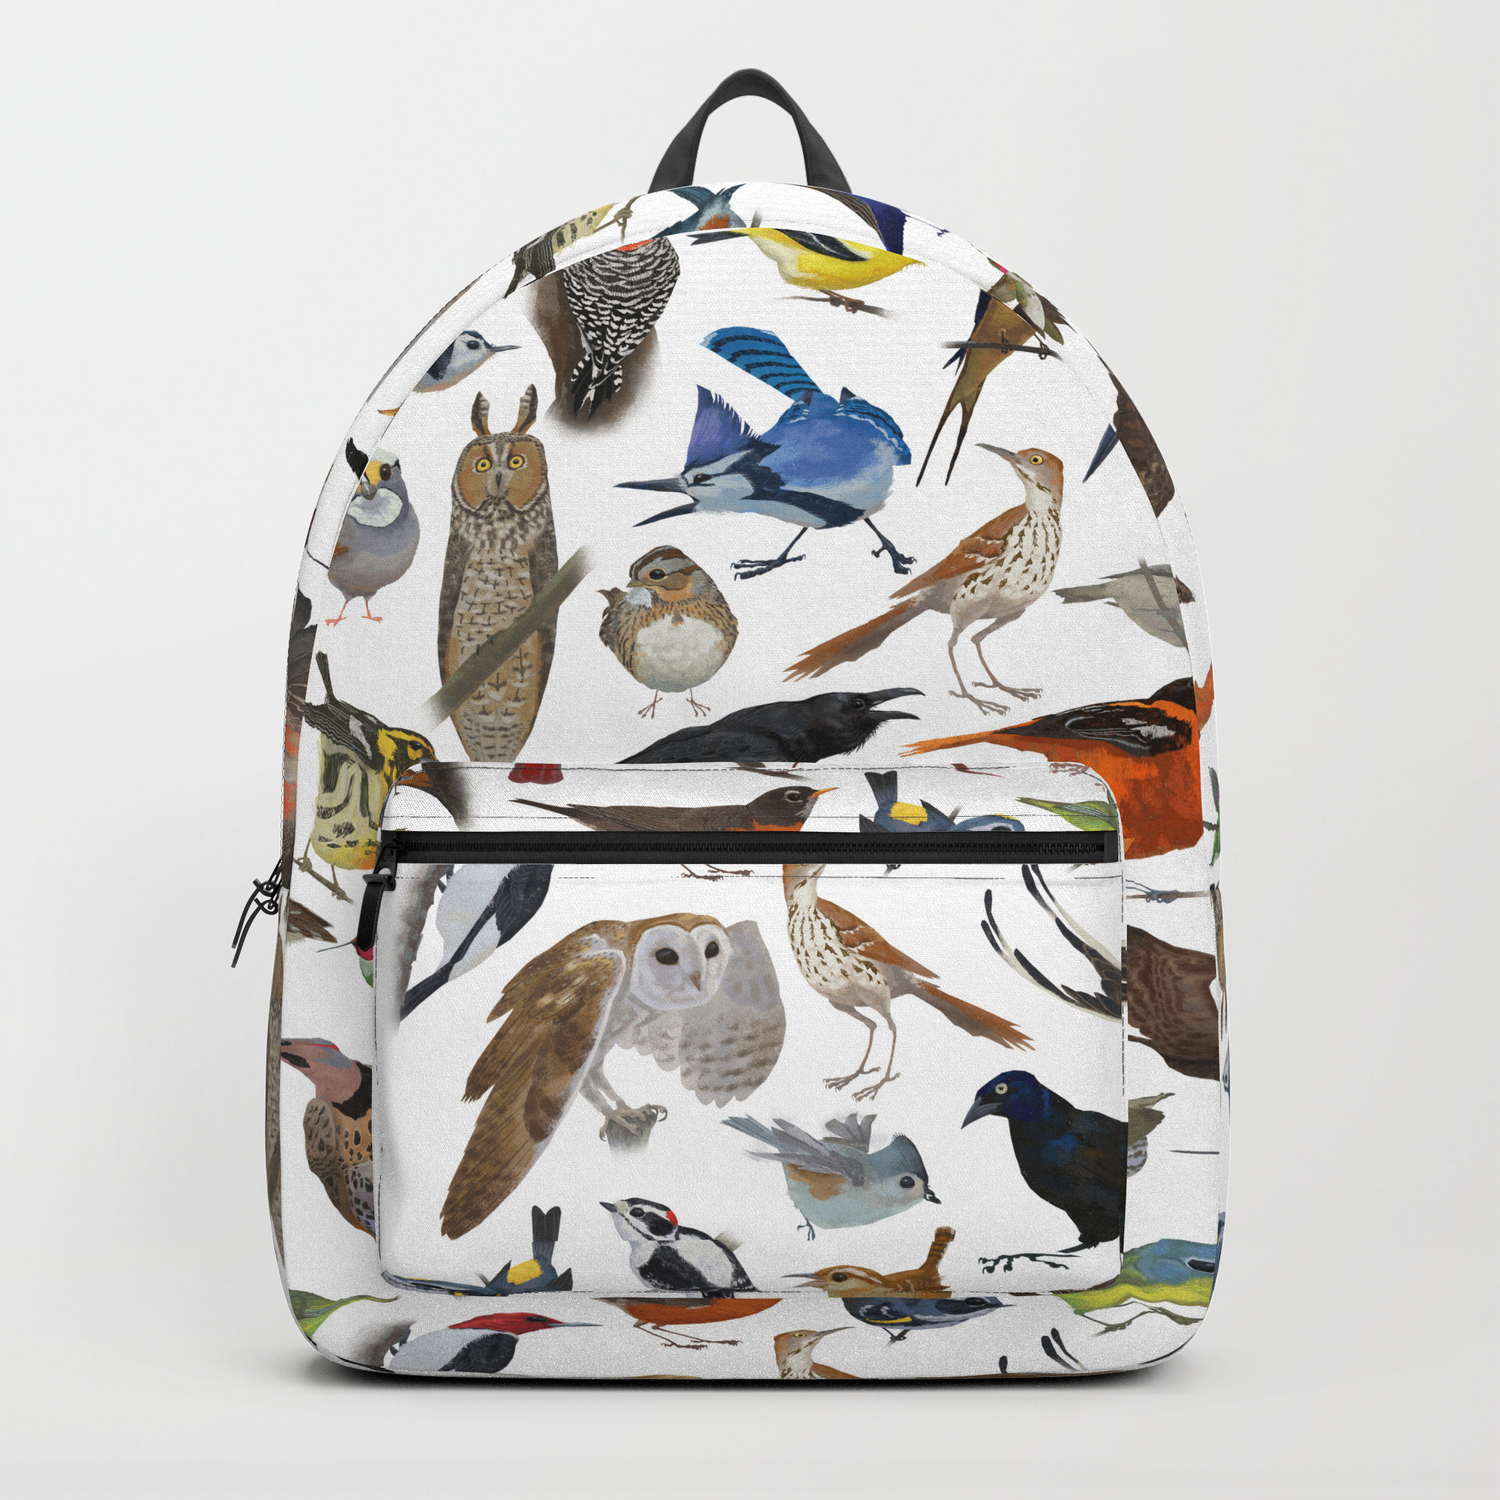 Zonder hoofd Couscous Carrière Bird Pattern Backpack by Brad Sneed | Society6